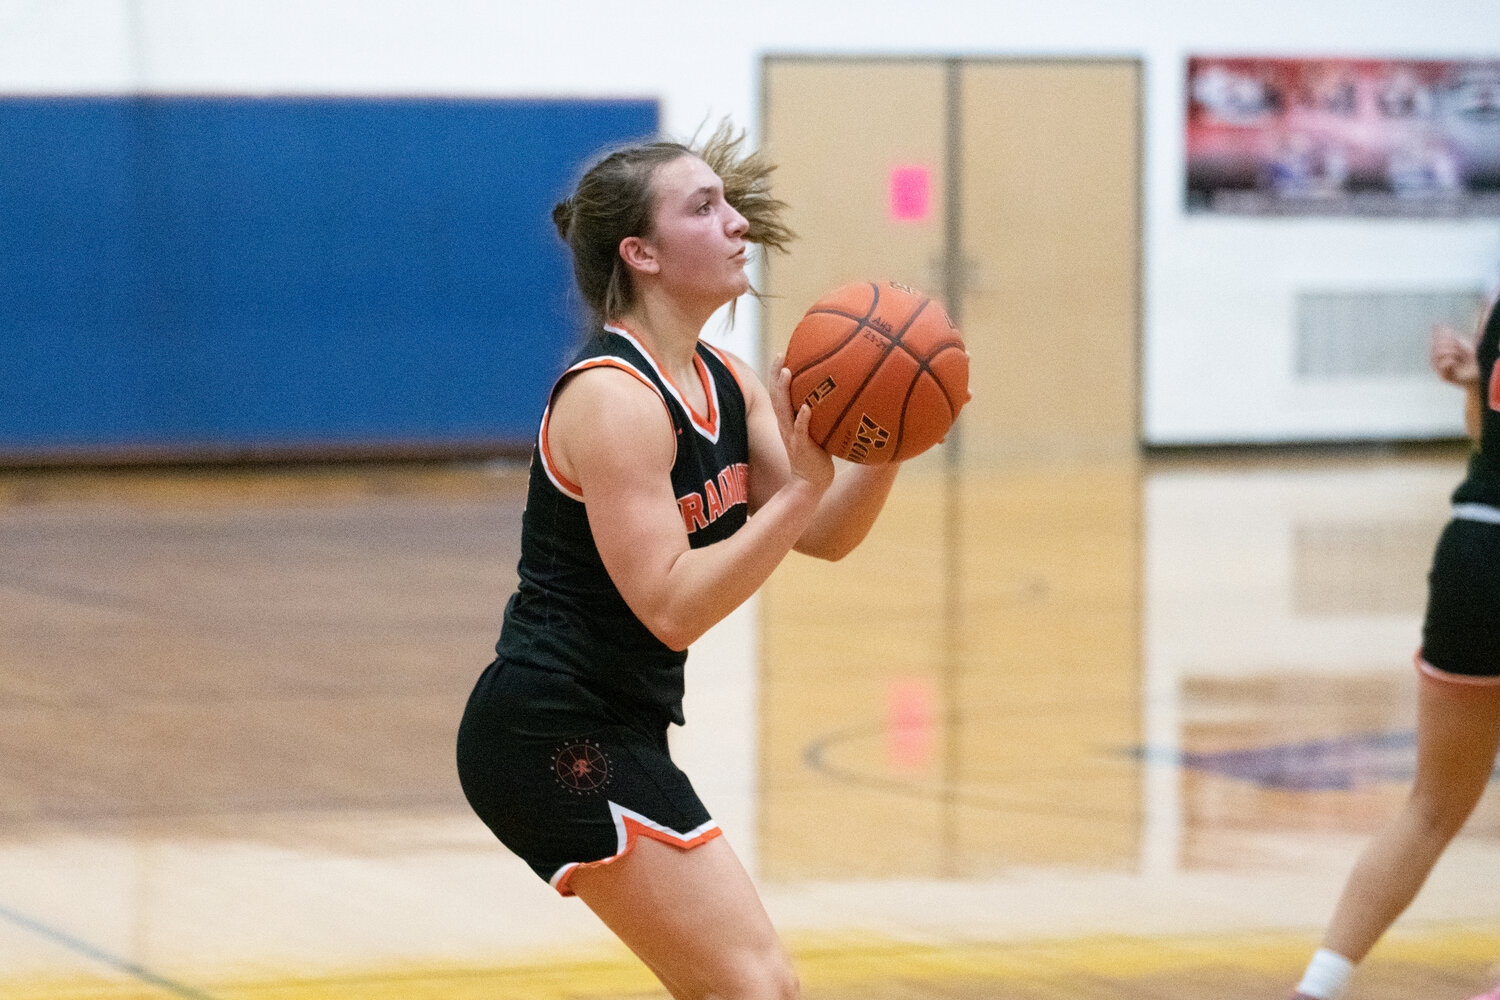 Bryn Beckman lines up a 3-pointer duiring the first half of Rainier's 52-49 win at Adna on Dec. 8.